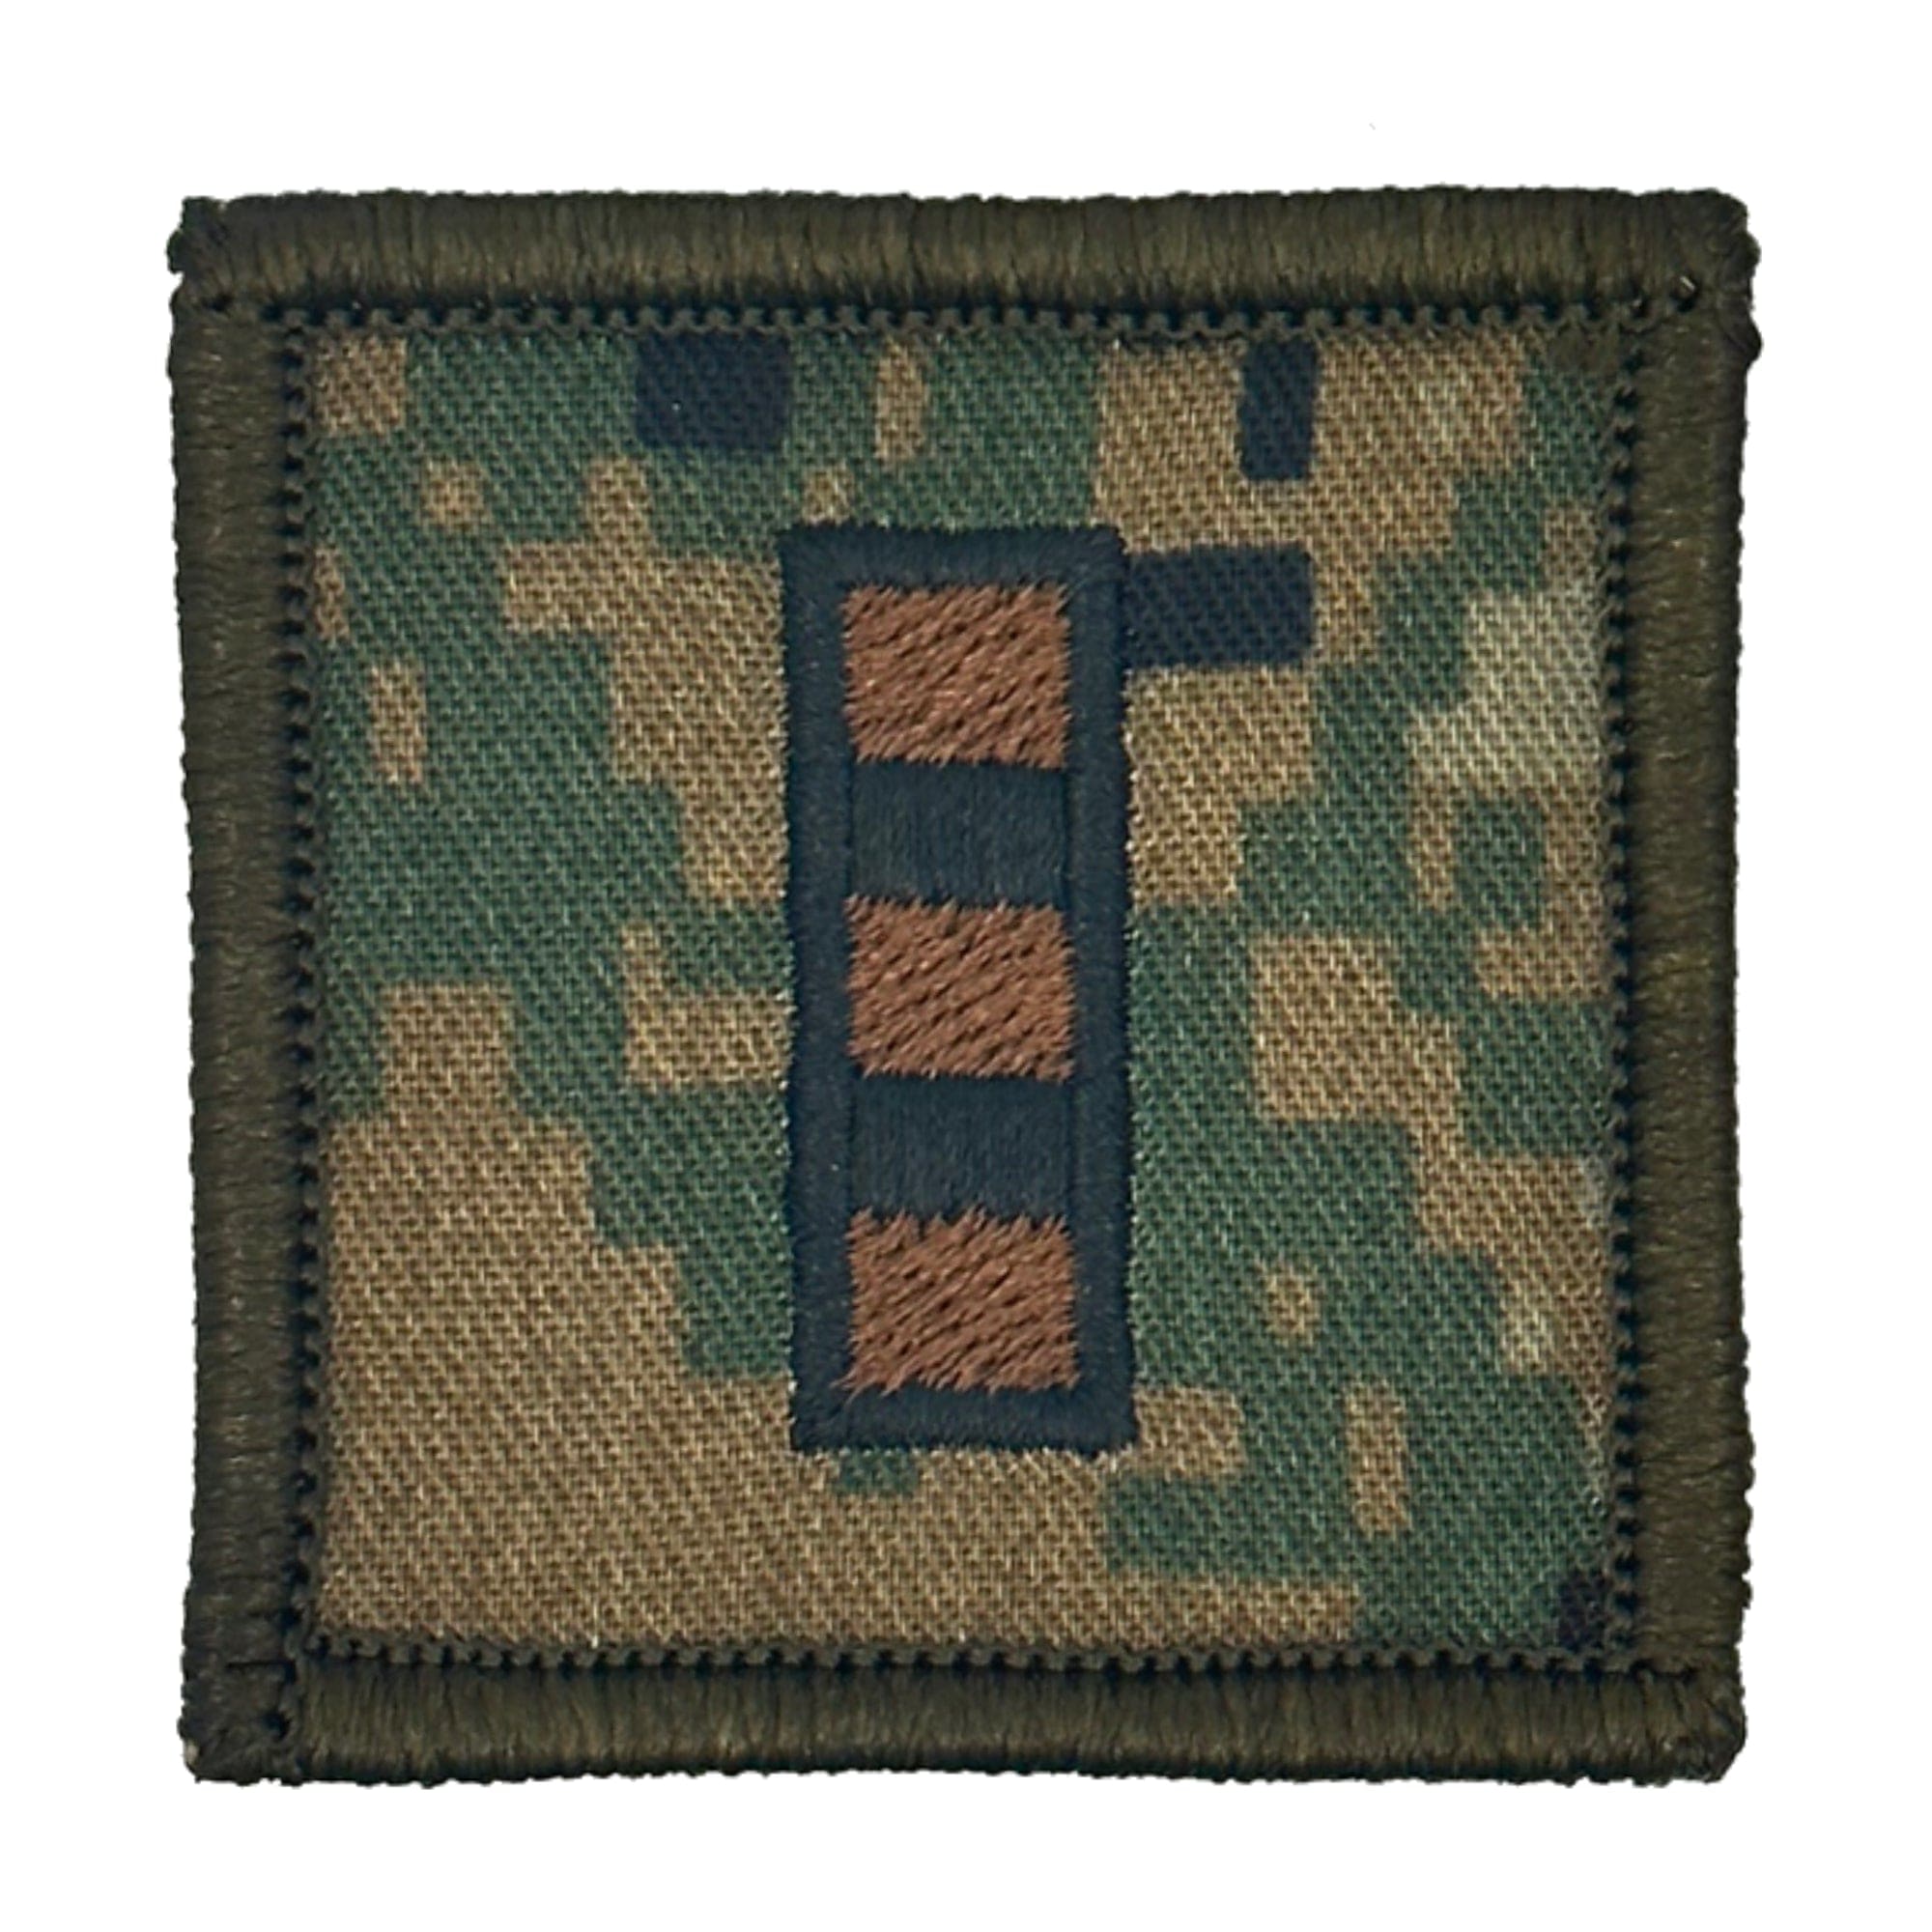 Tactical Gear Junkie Patches MARPAT Woodland / Chief Warrant Officer 4 USMC Rank Insignia - 2x2 Patch